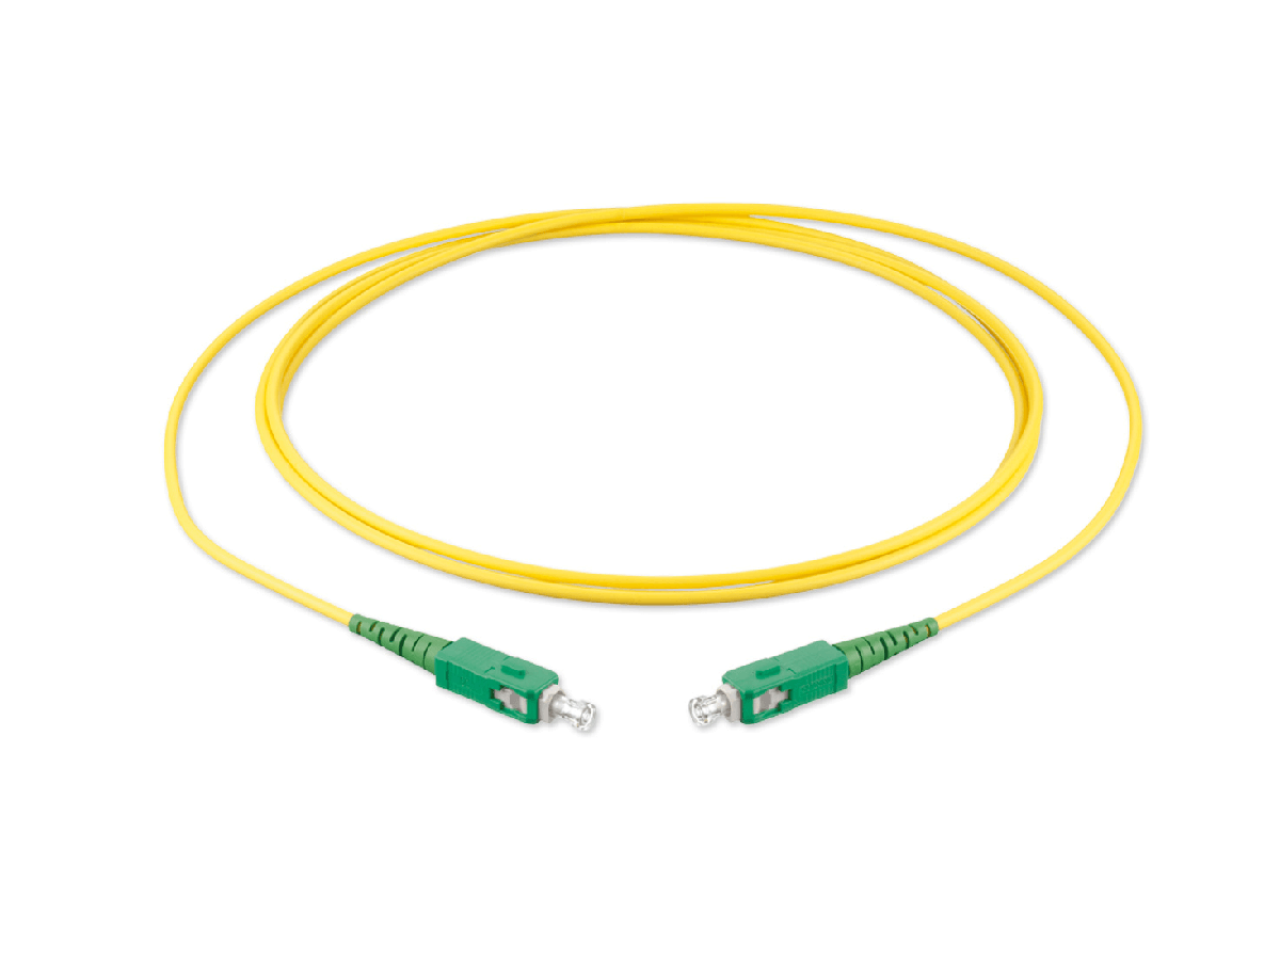 One of Corning’s connectorized cable solutions:  an SC APC to SC APC patch cord.